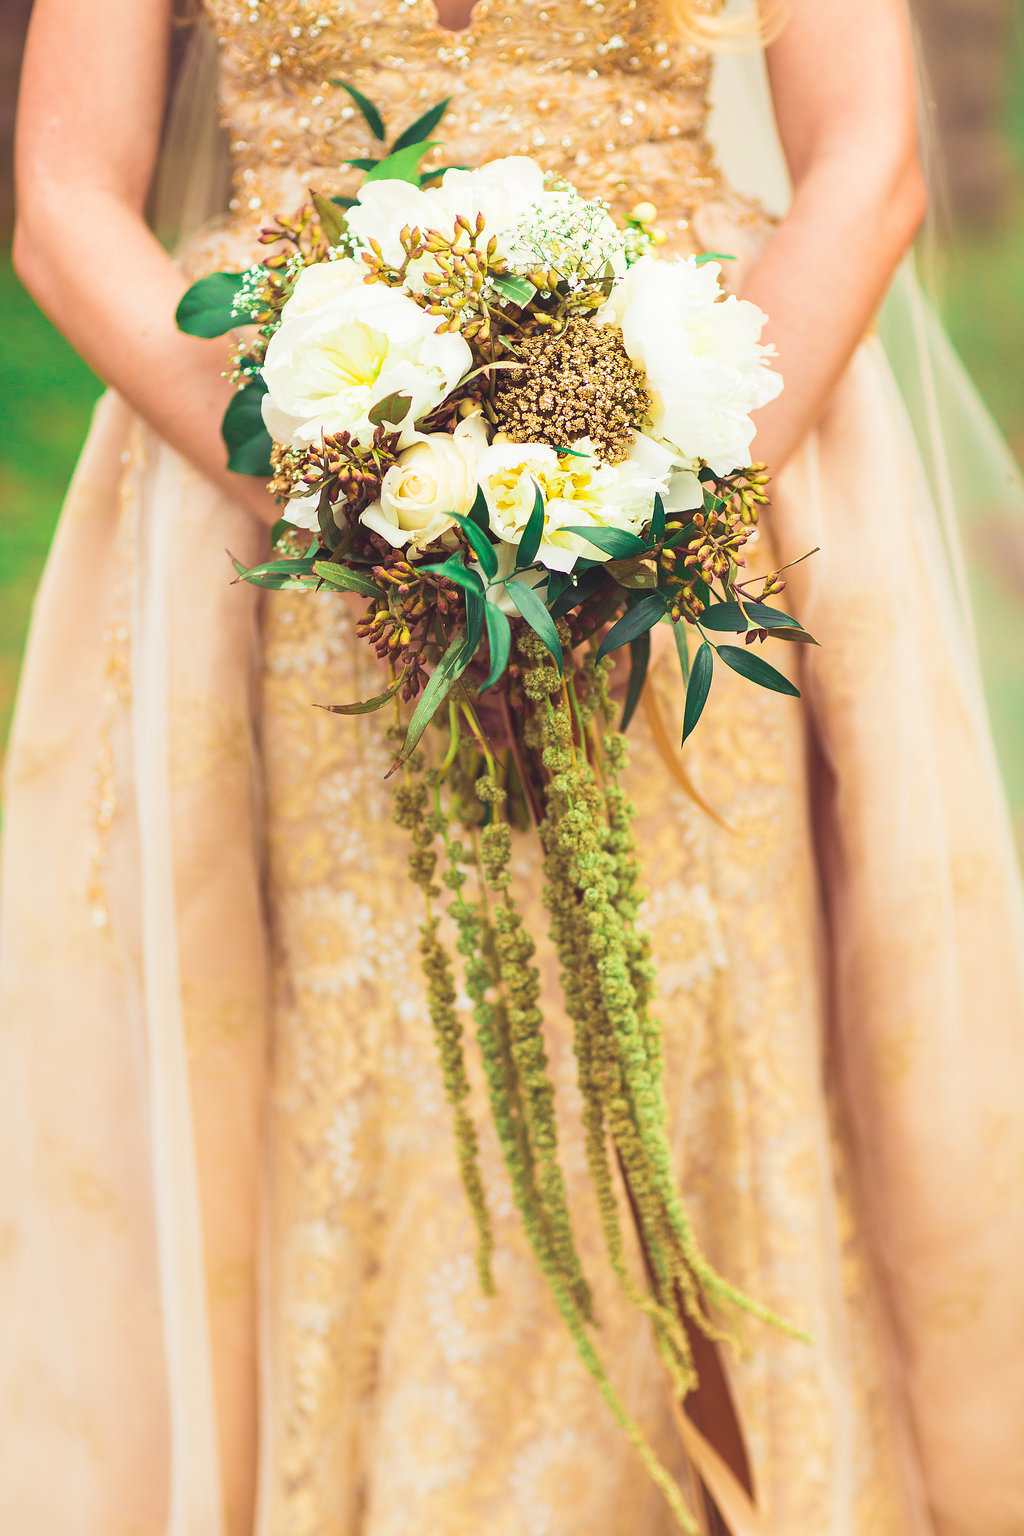 Wedding Photograph Of Bride in Wedding Gown Holding a Wedding Bouquet  Los Angeles